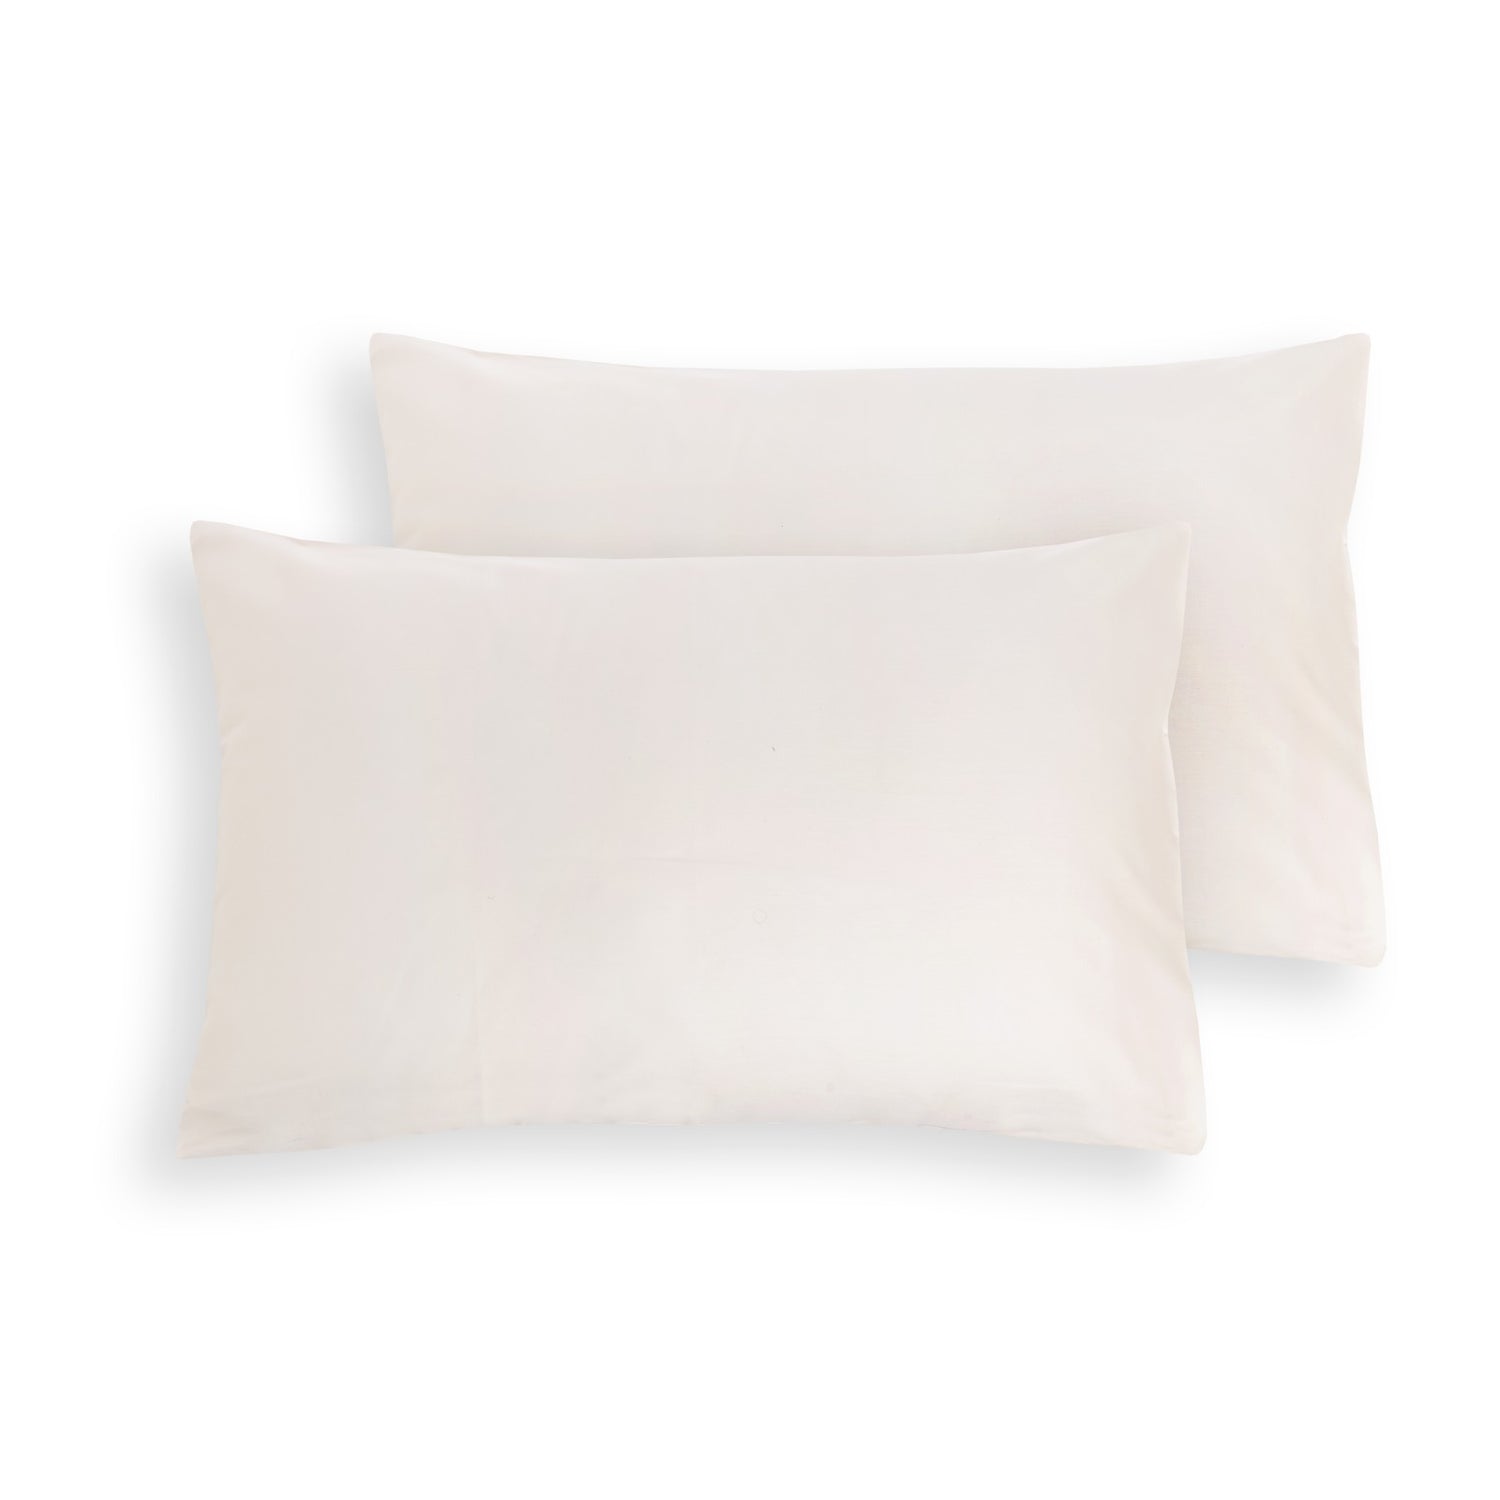 Heather &amp; Ferne 300 Thread Count 100% Cotton Housewife Pillowcase - Cream 1 Shaws Department Stores